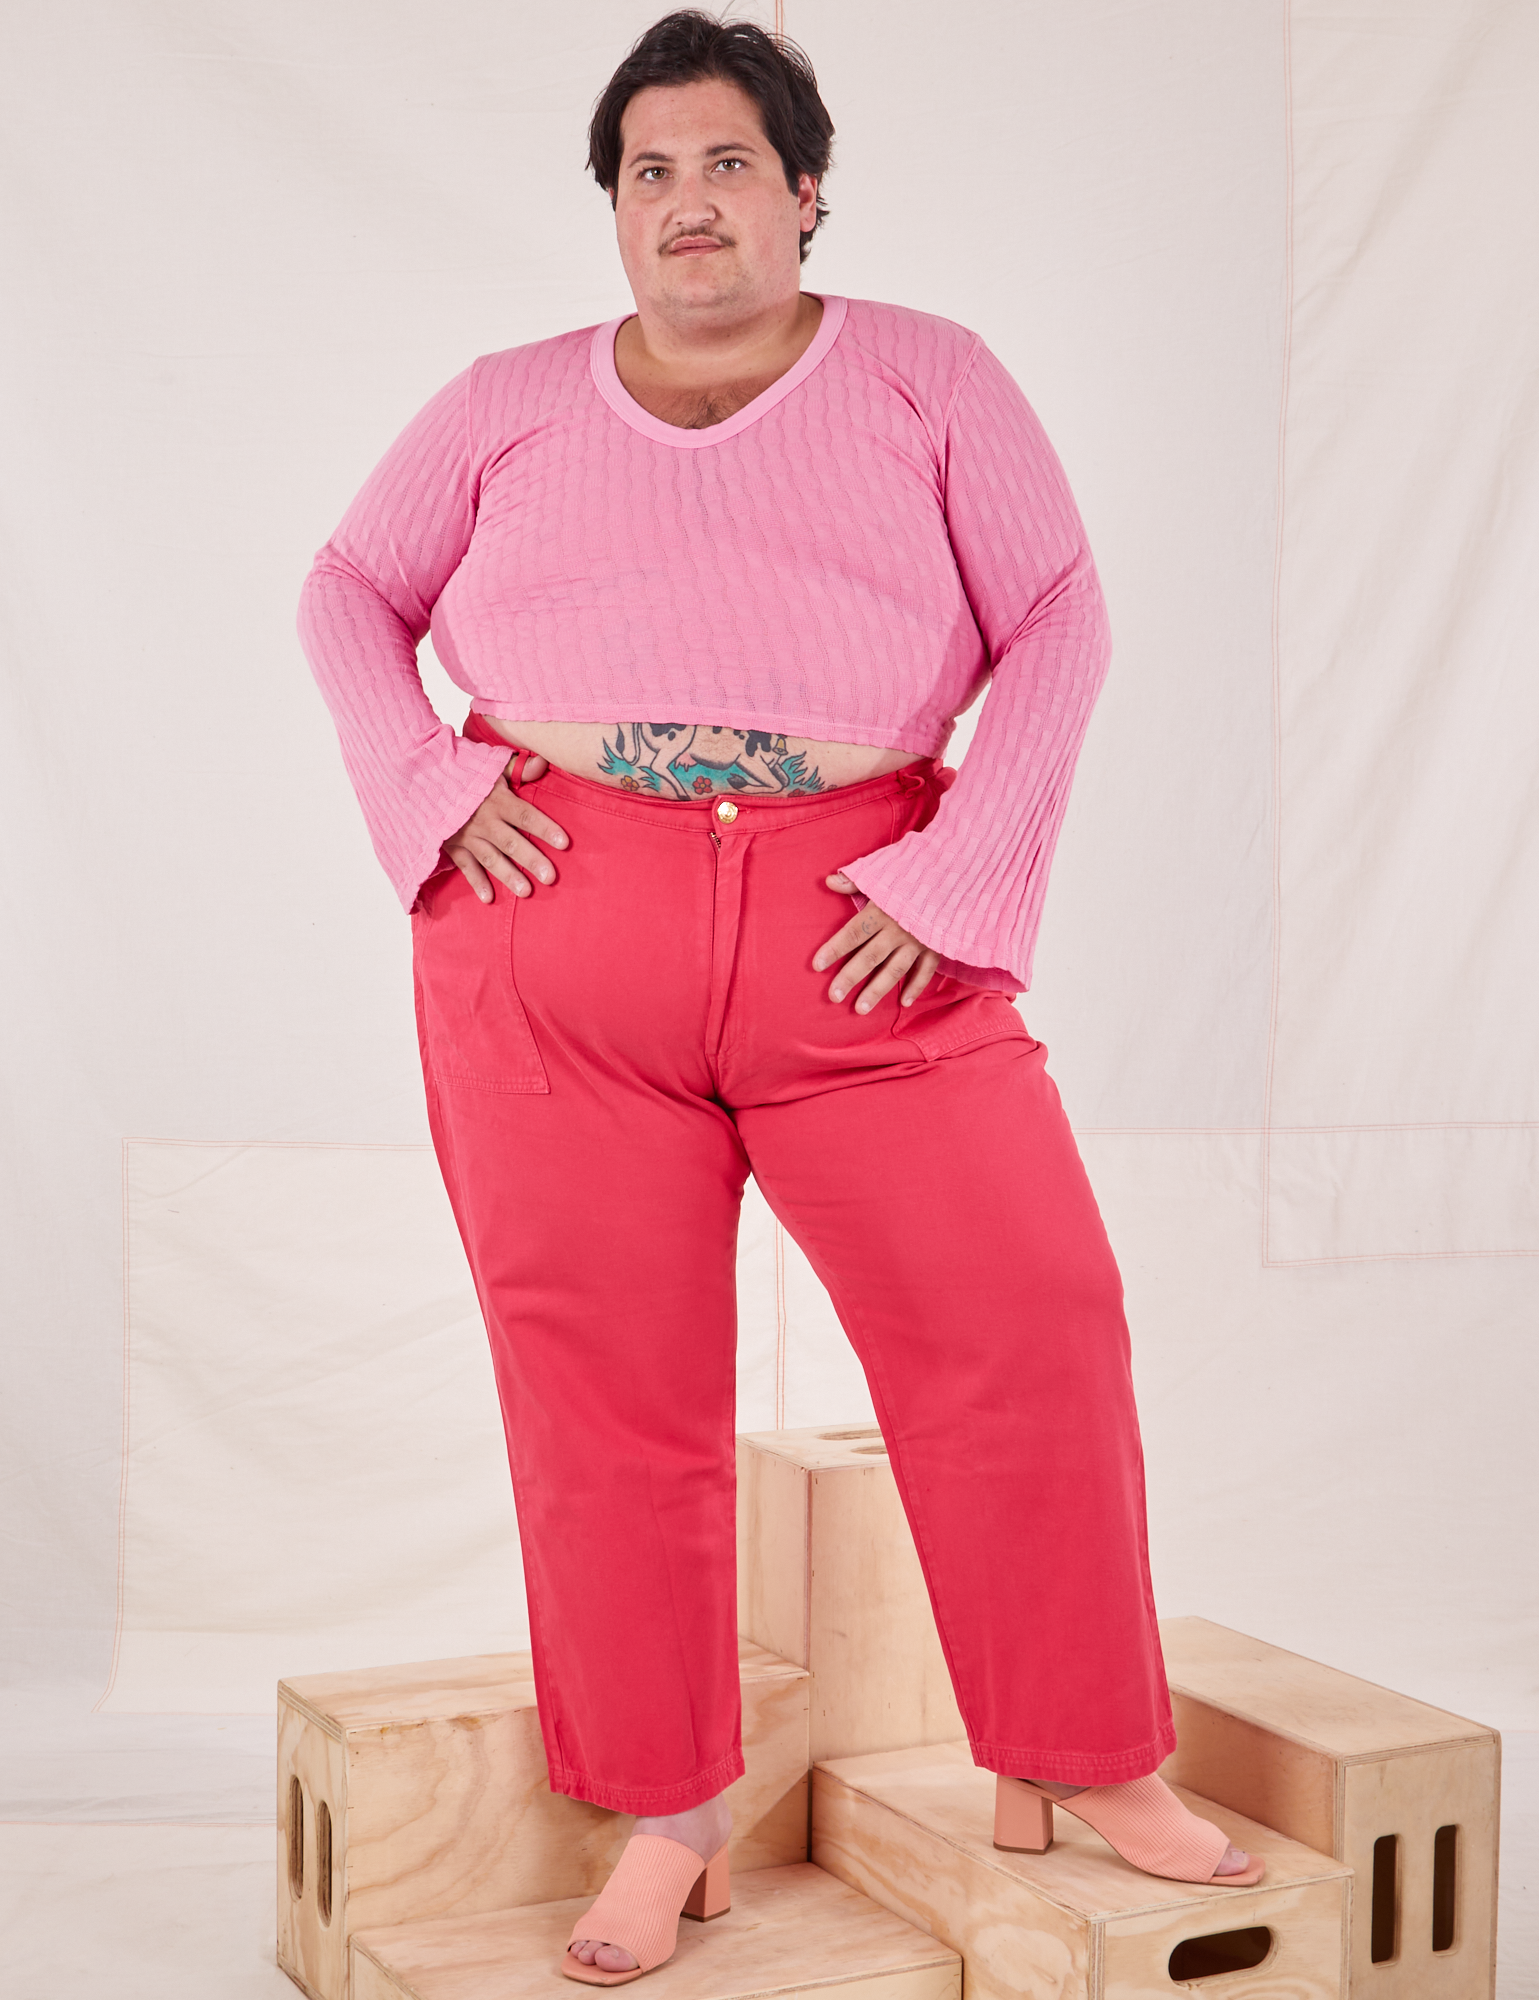 Sam is wearing Bell Sleeve Top in Bubblegum Pink and hot pink Work Pants